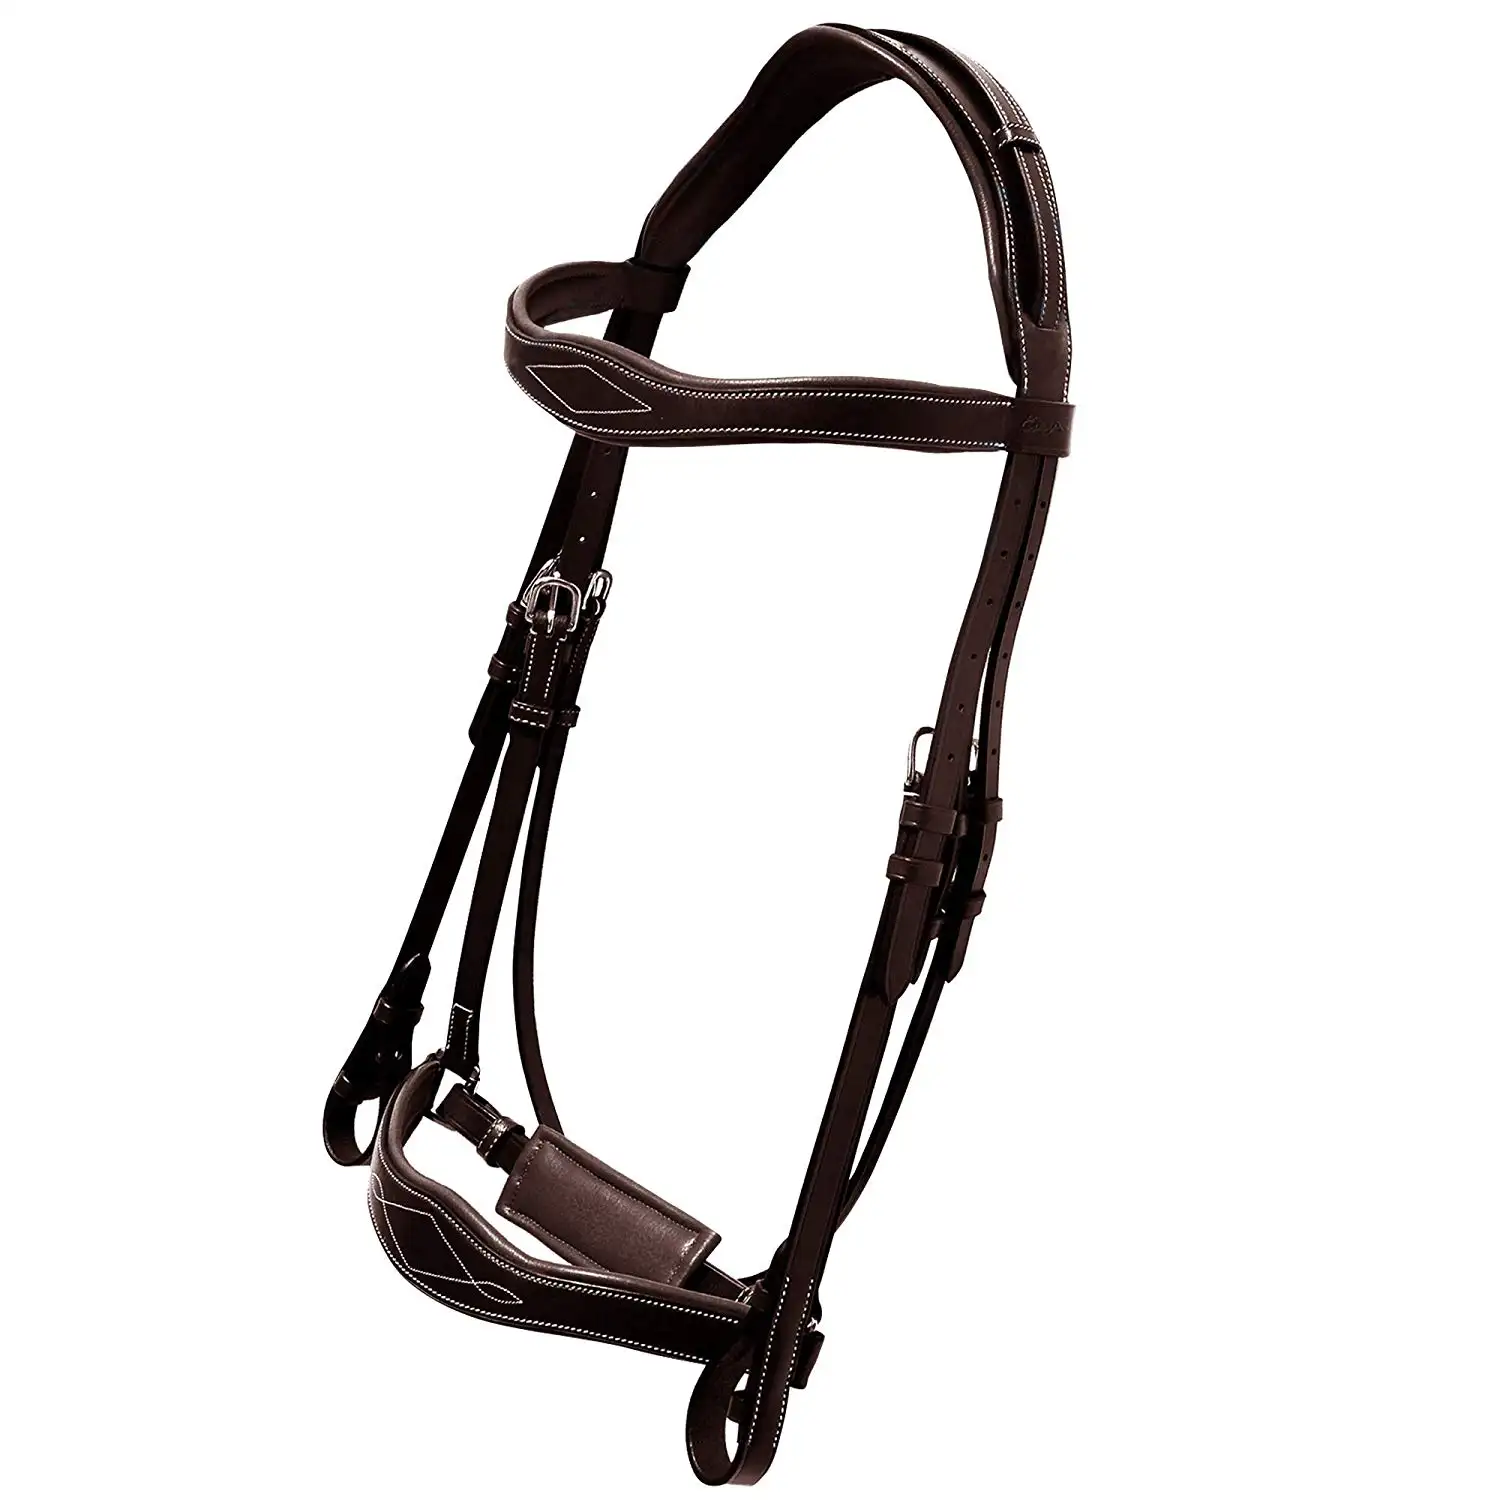 Snaffle Bridle with padded Wholesale professional equine halter tack riding headstall equestrian equipment Profession